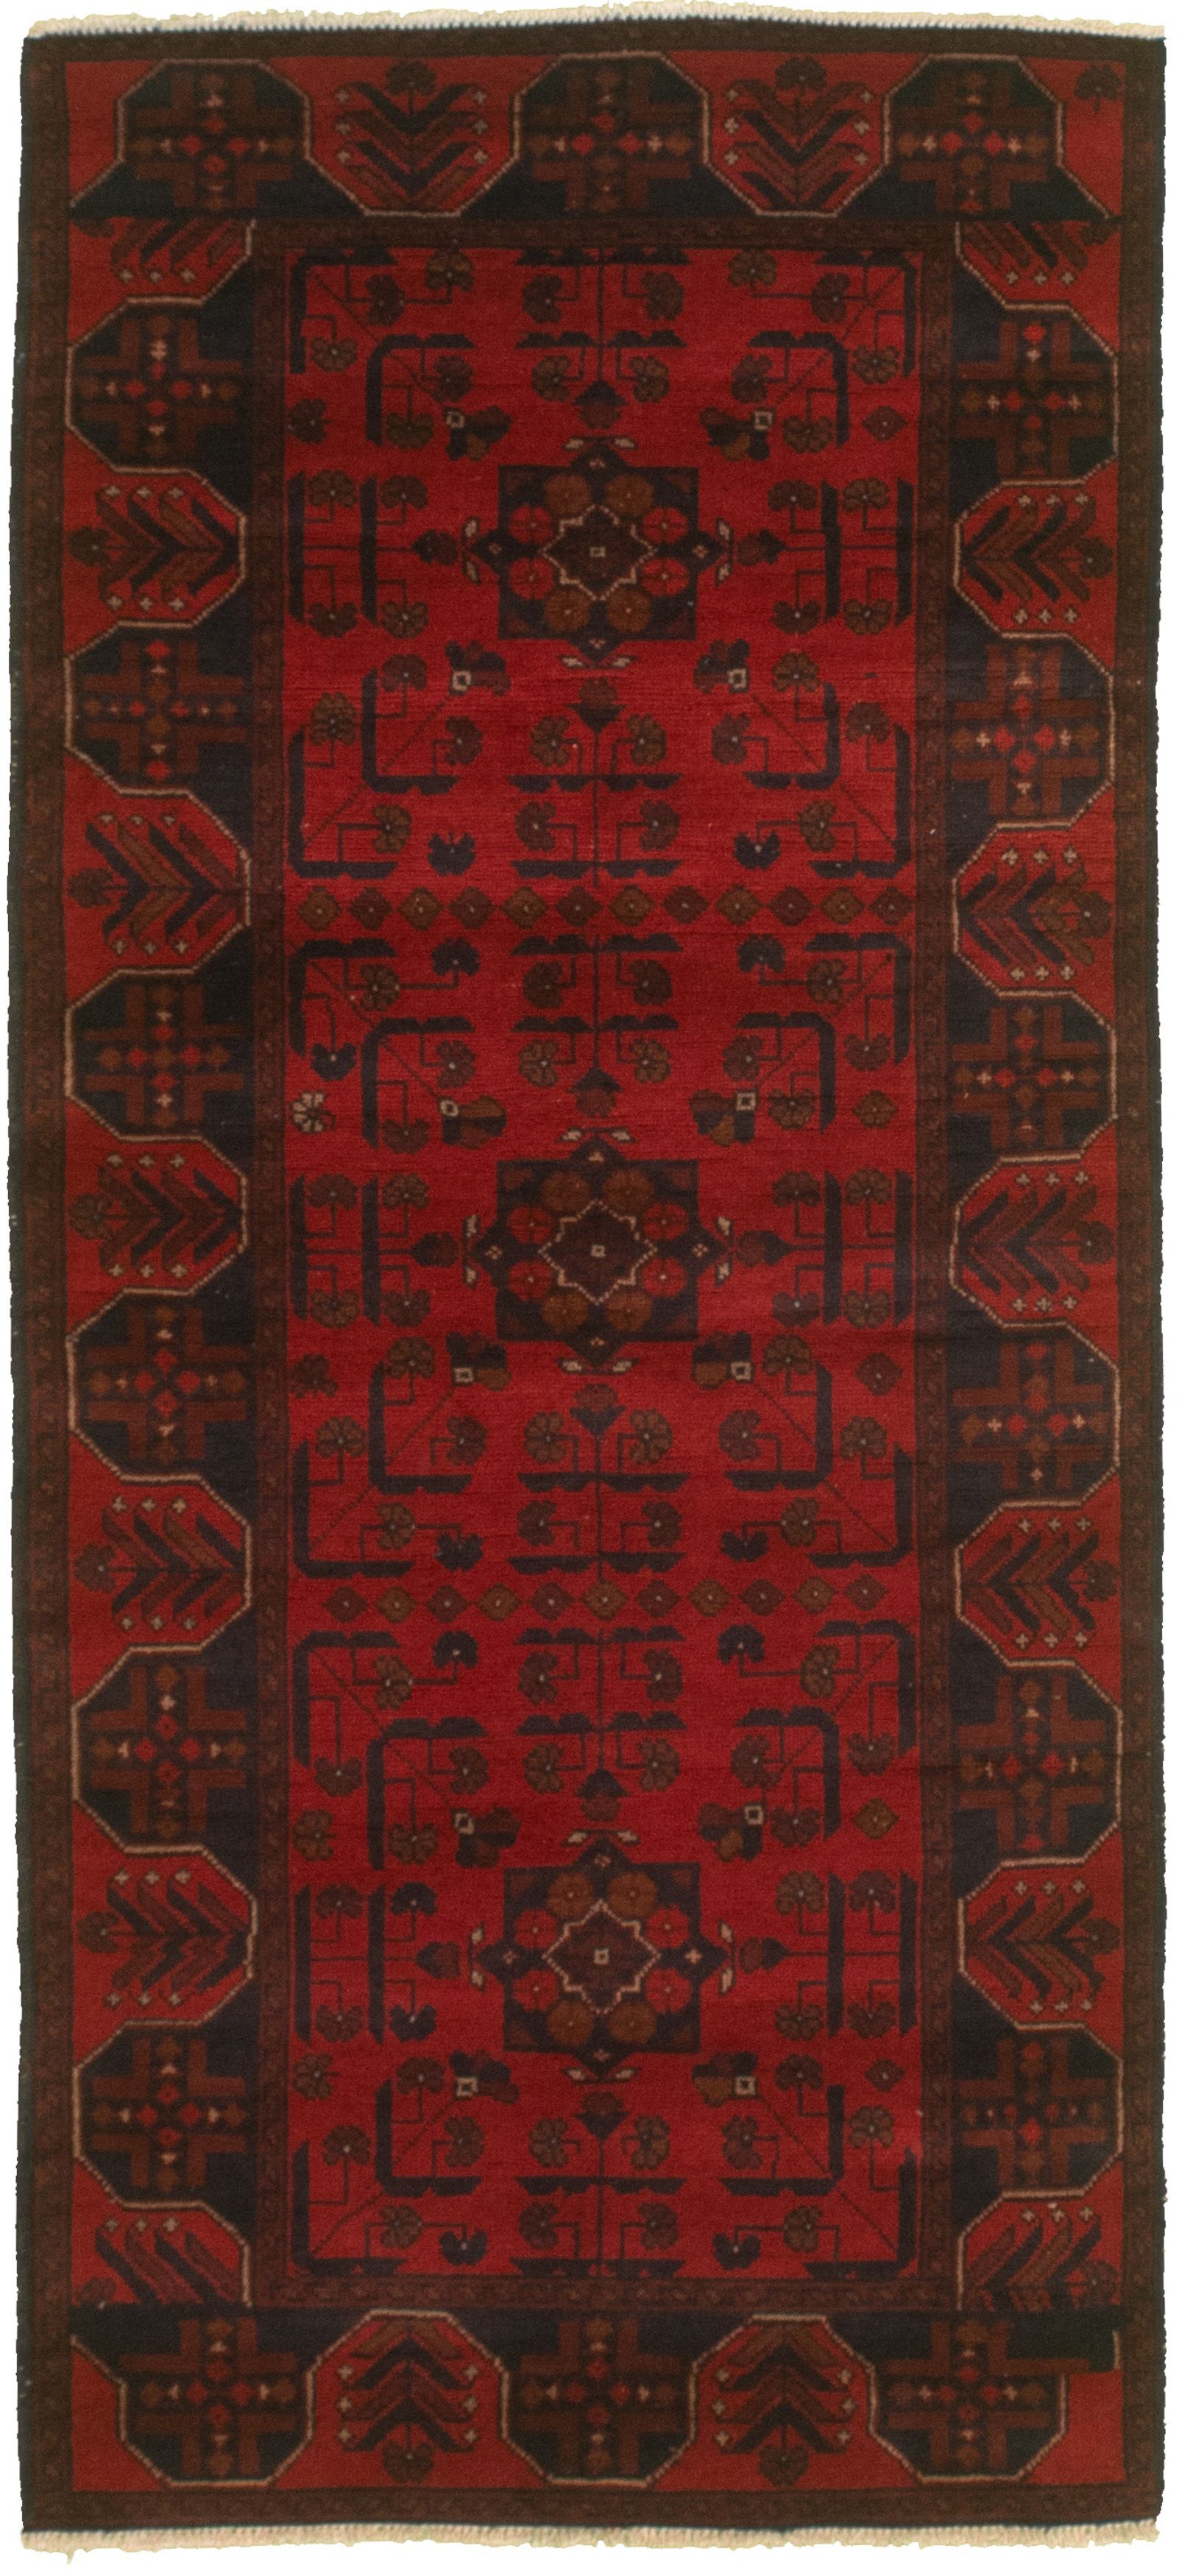 Hand-knotted Finest Khal Mohammadi Red  Rug 2'10" x 6'4"  Size: 2'10" x 6'4"  